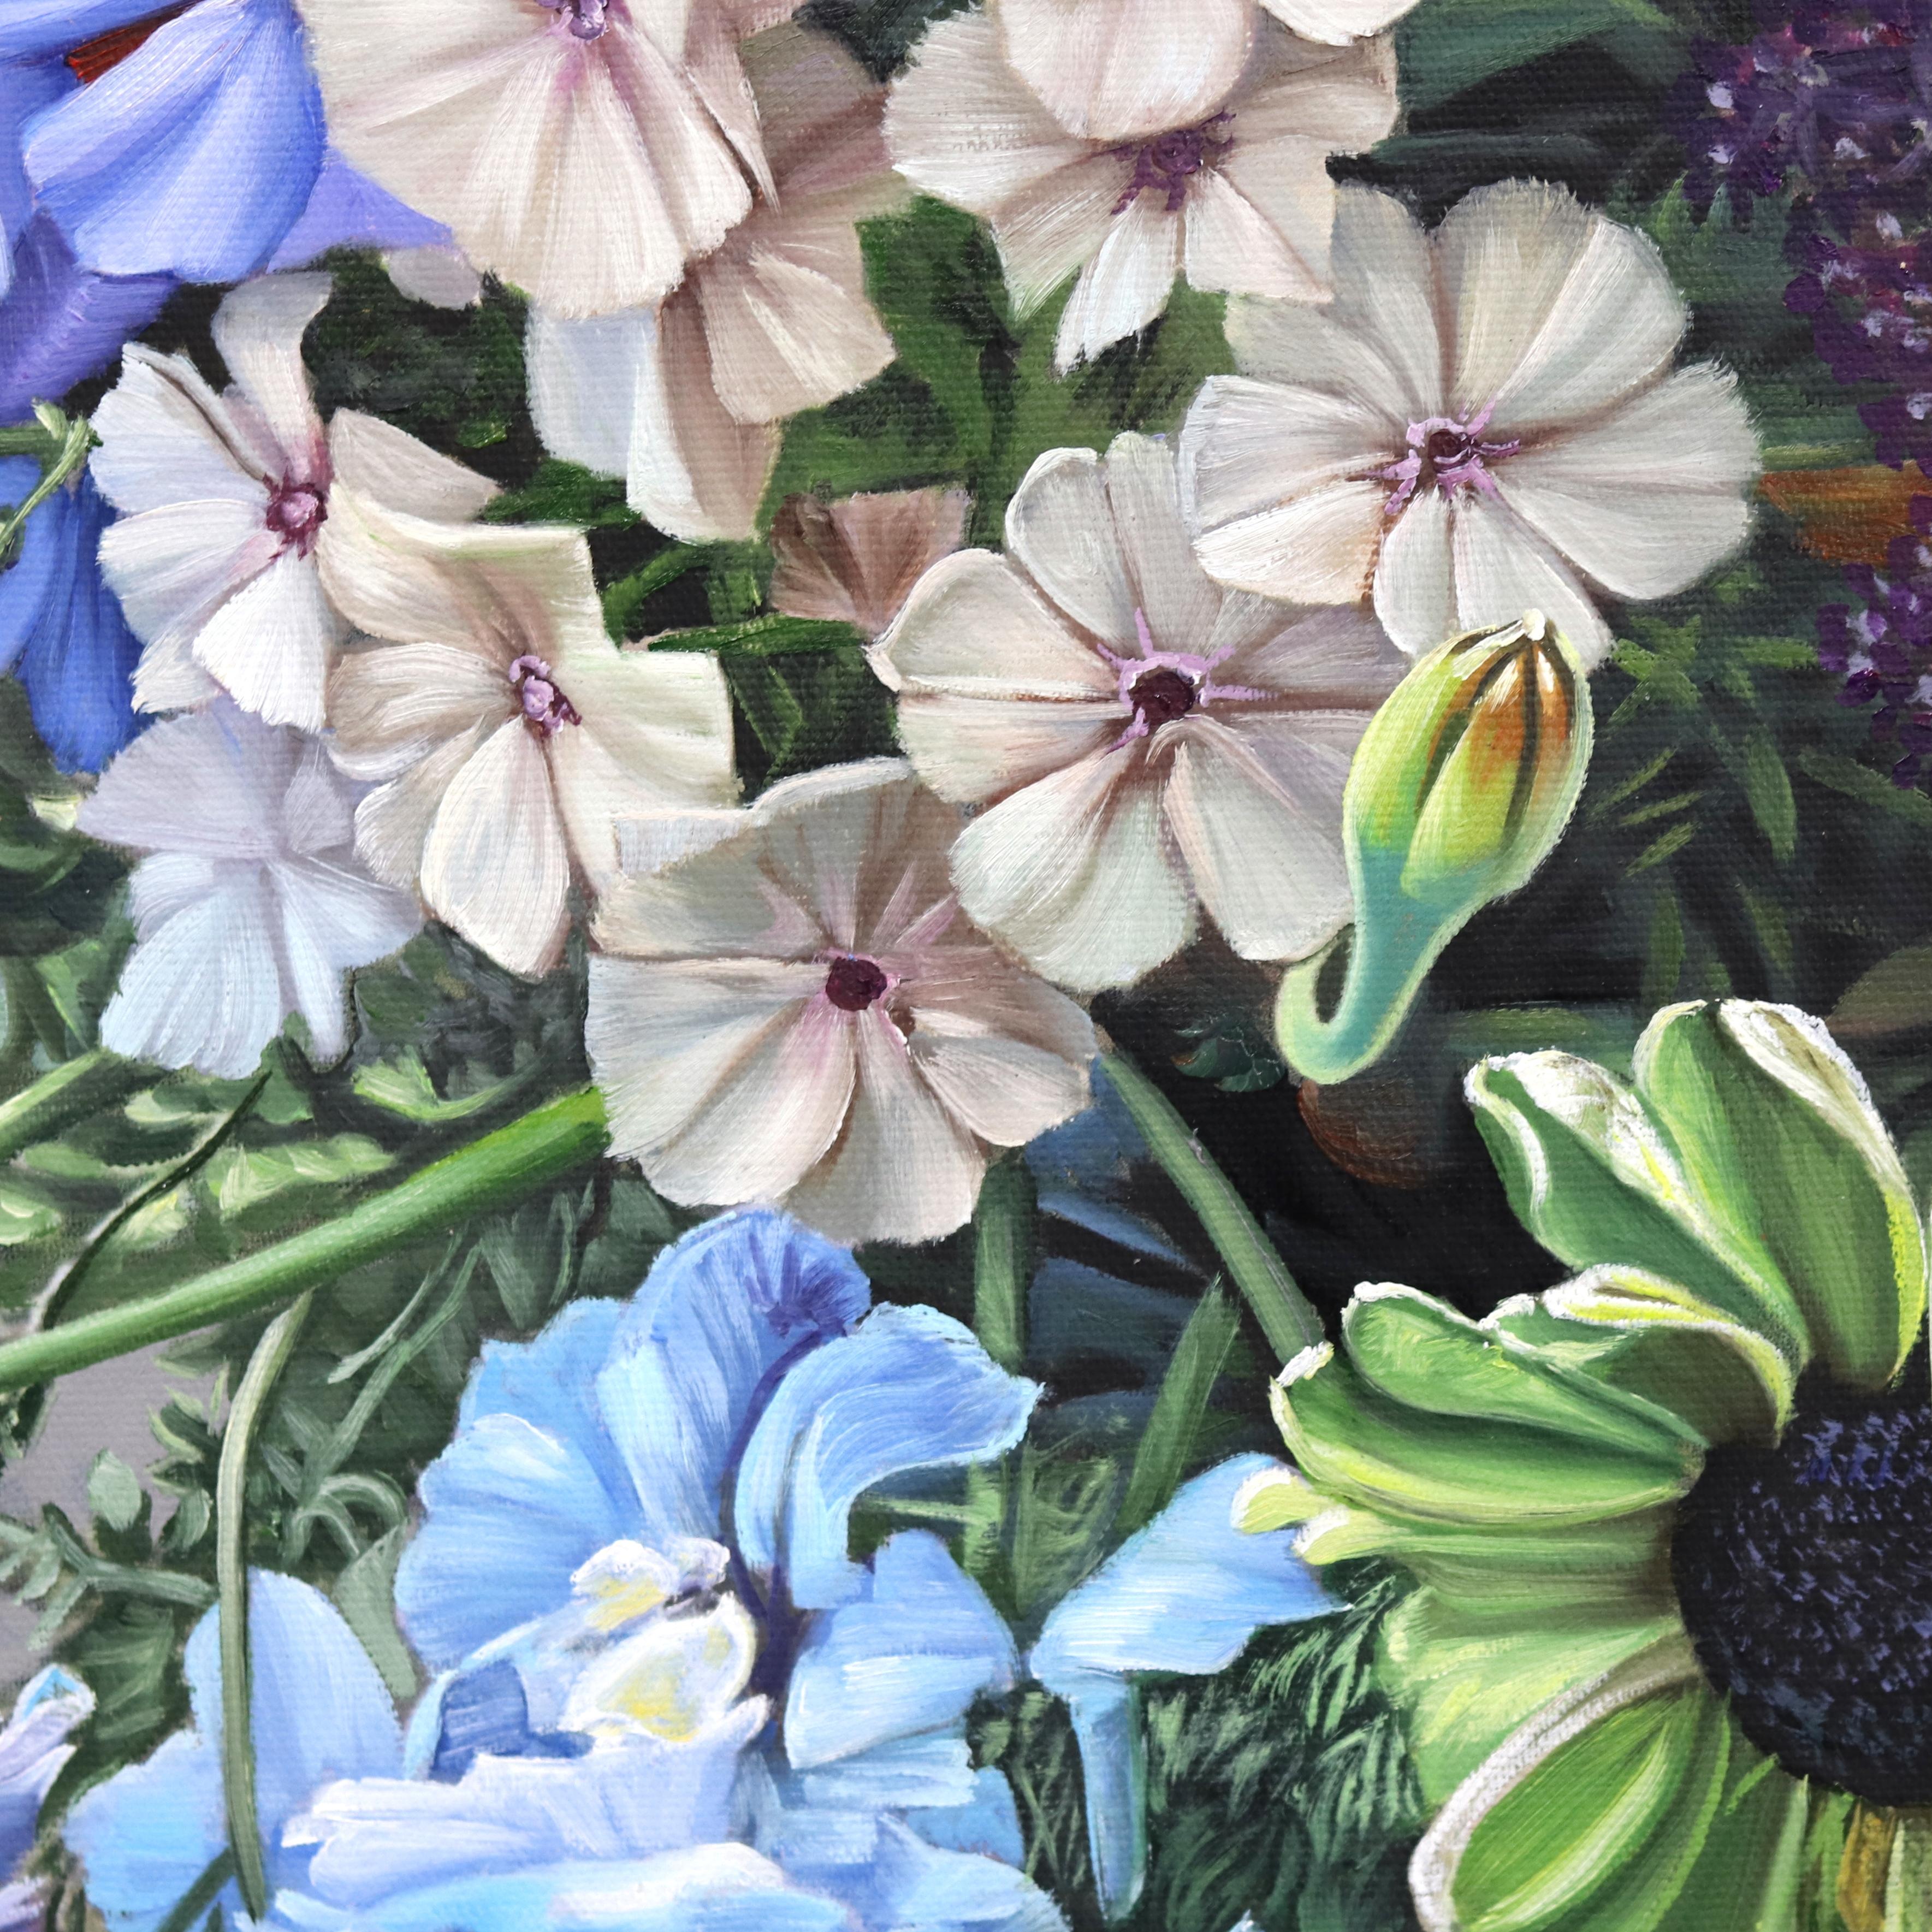 Touching Souls - Hyperrealist Floral Still Life Oil Painting 6